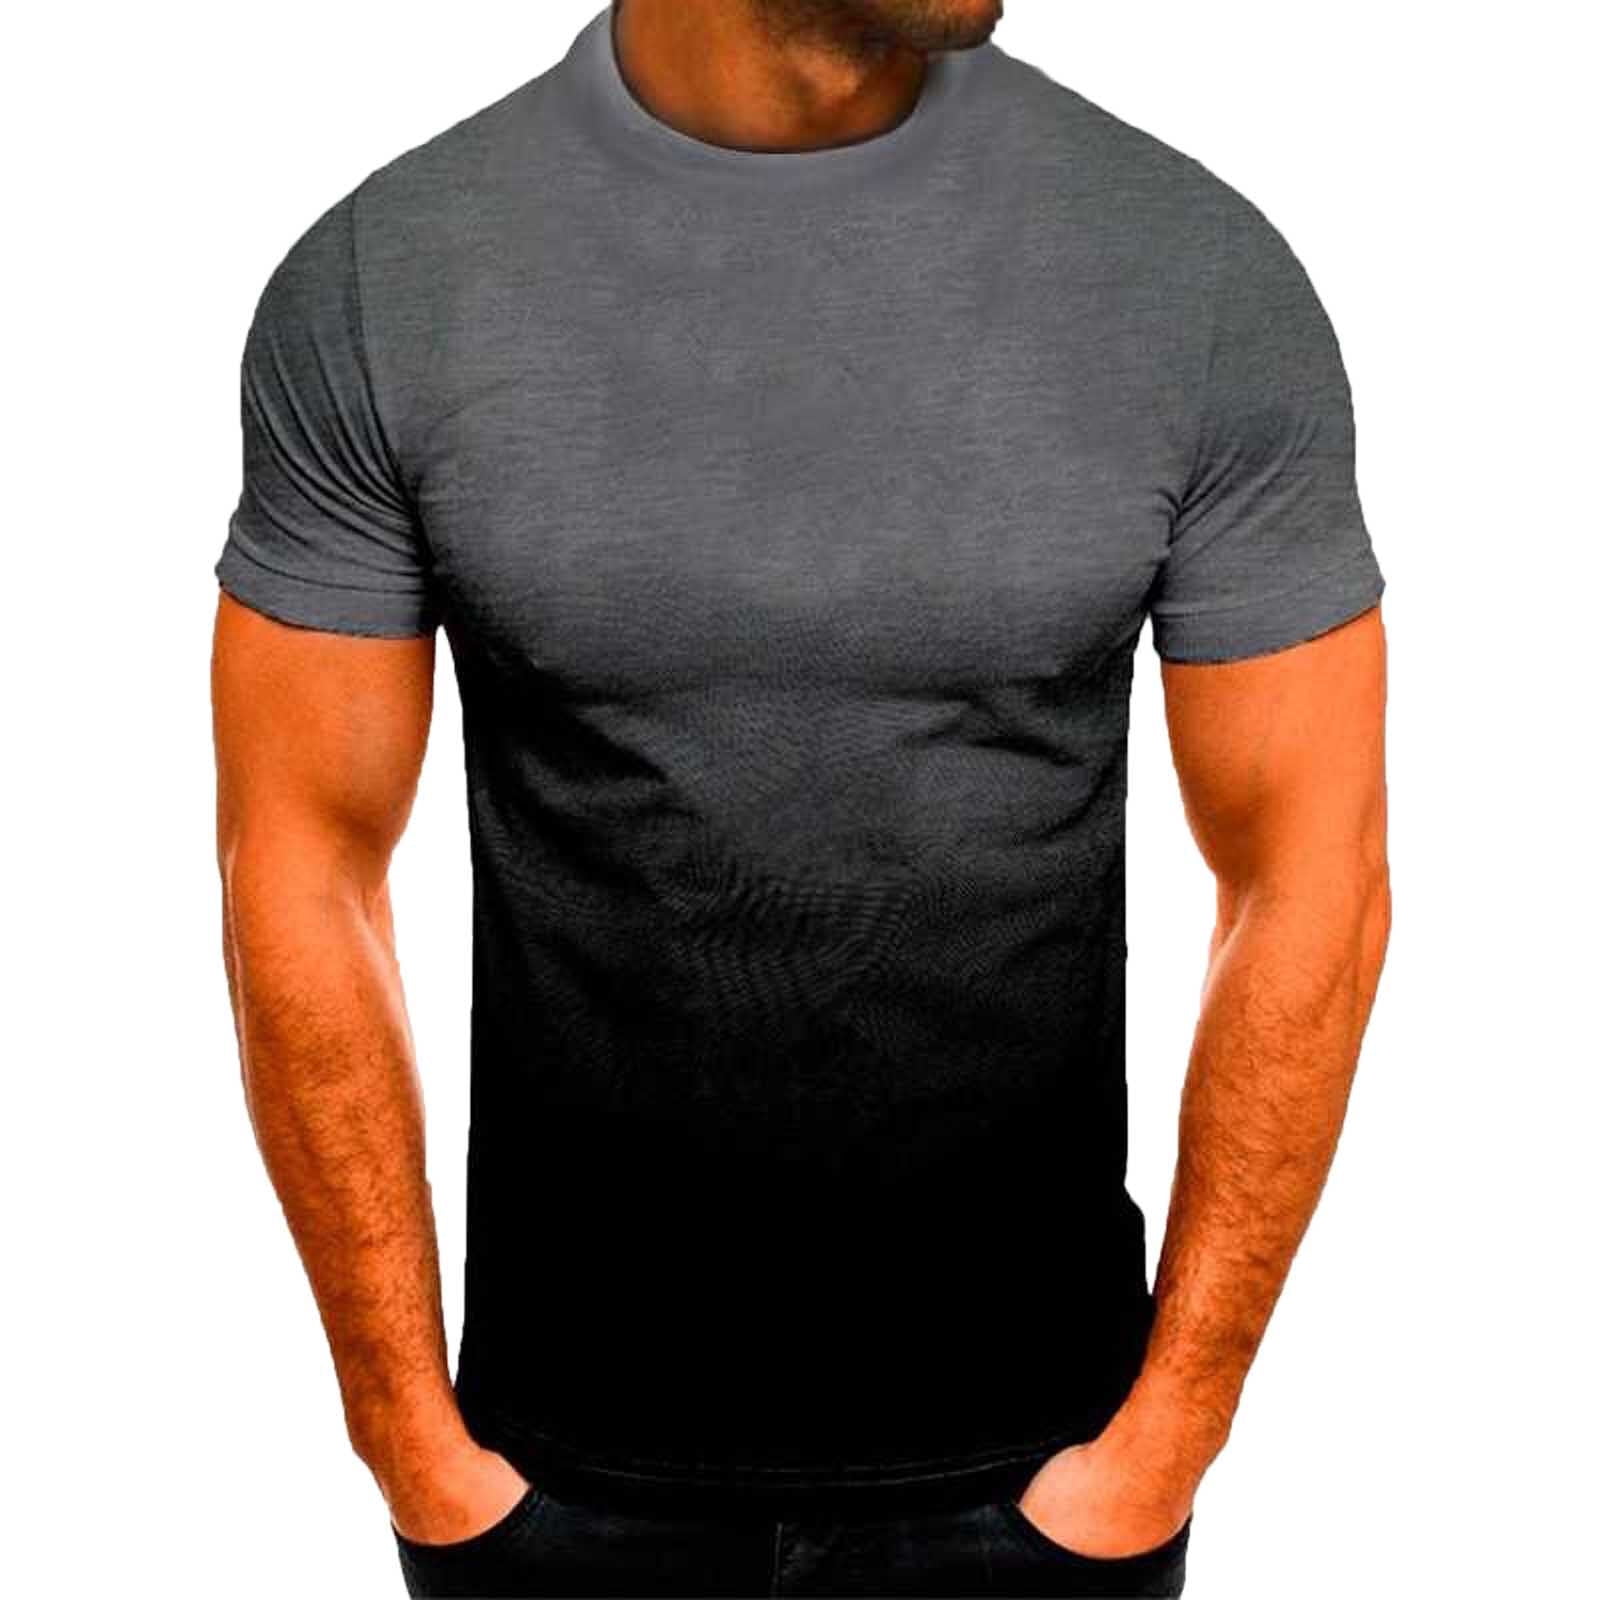 Men Short Sleeve Printing Round Neck Pullover T Shirt Blouse Workout Shirts  For Men,Gray,XL 